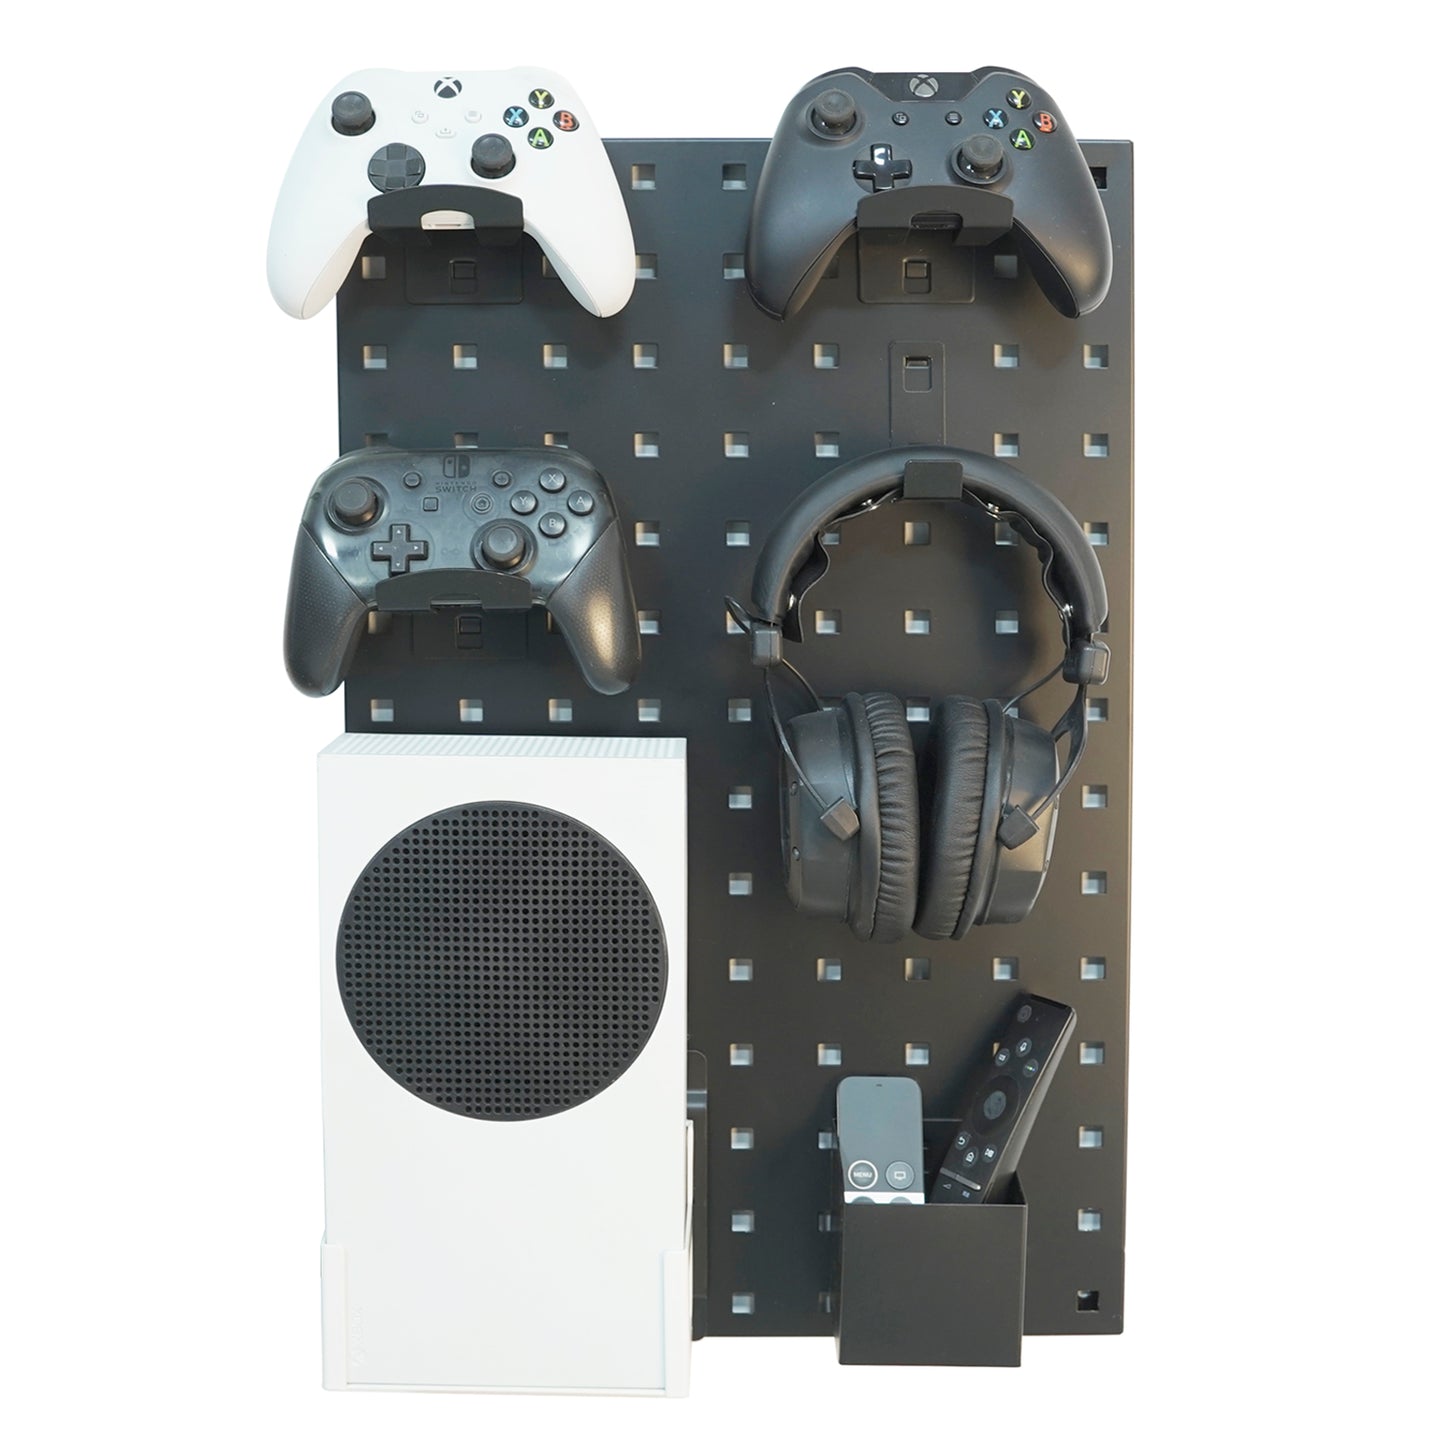 Monzlteck Metal Pegboard Wall Mount Kit for Gaming Consoles(xbox/ps5/ps4/switch),Controllers,Headset,Remote.22 x14inch Pegboard Wall Organizer and 7 Accessories